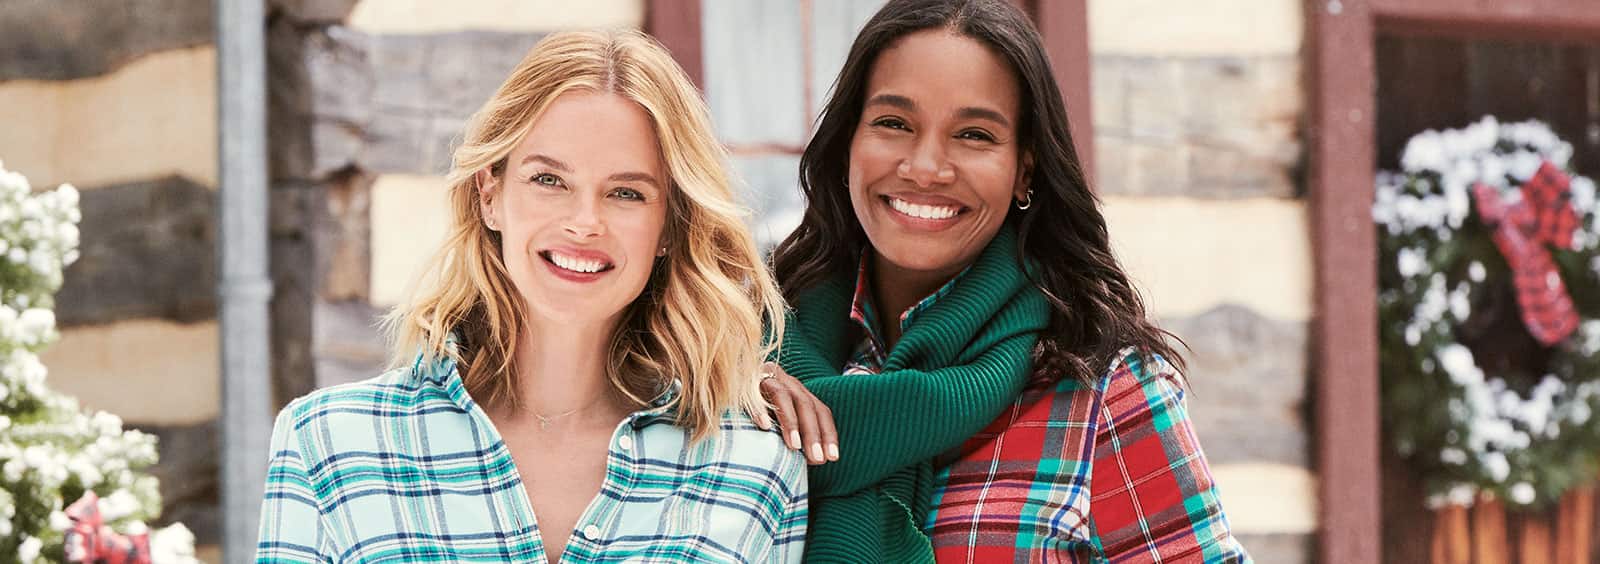 Flannel Shirts That Every Woman Can Rock